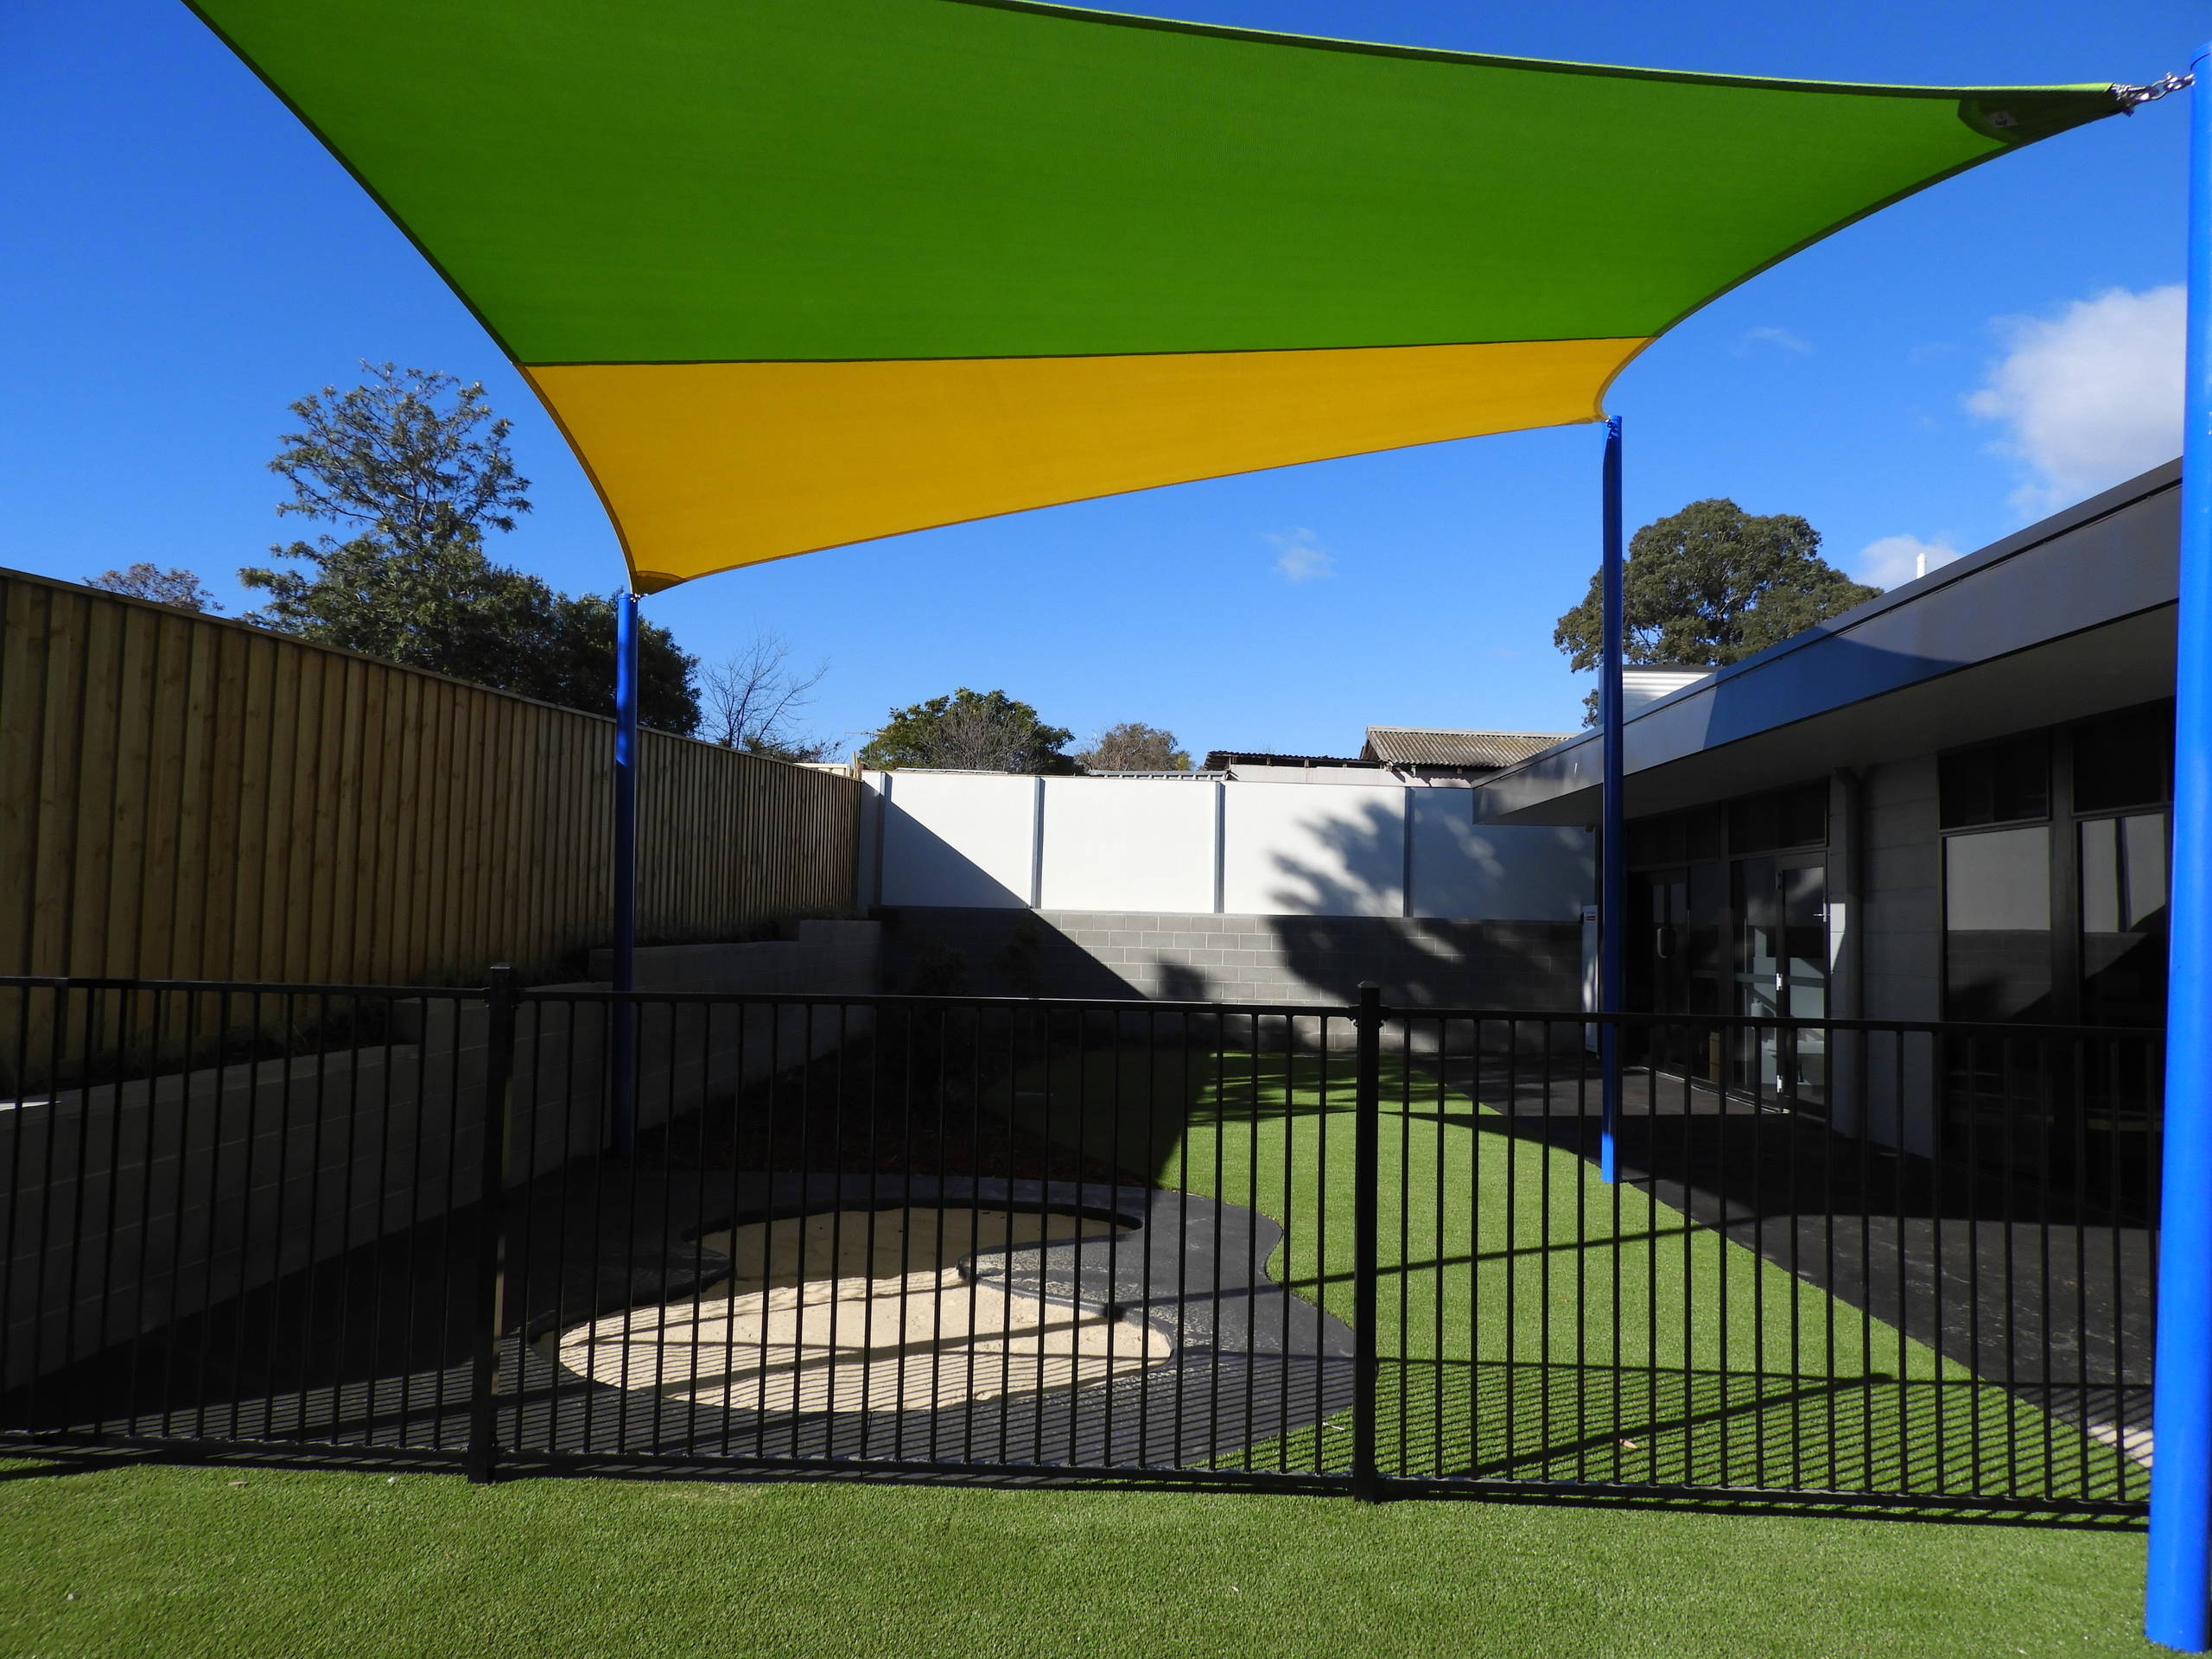 Outdoor play environment - childcare centre